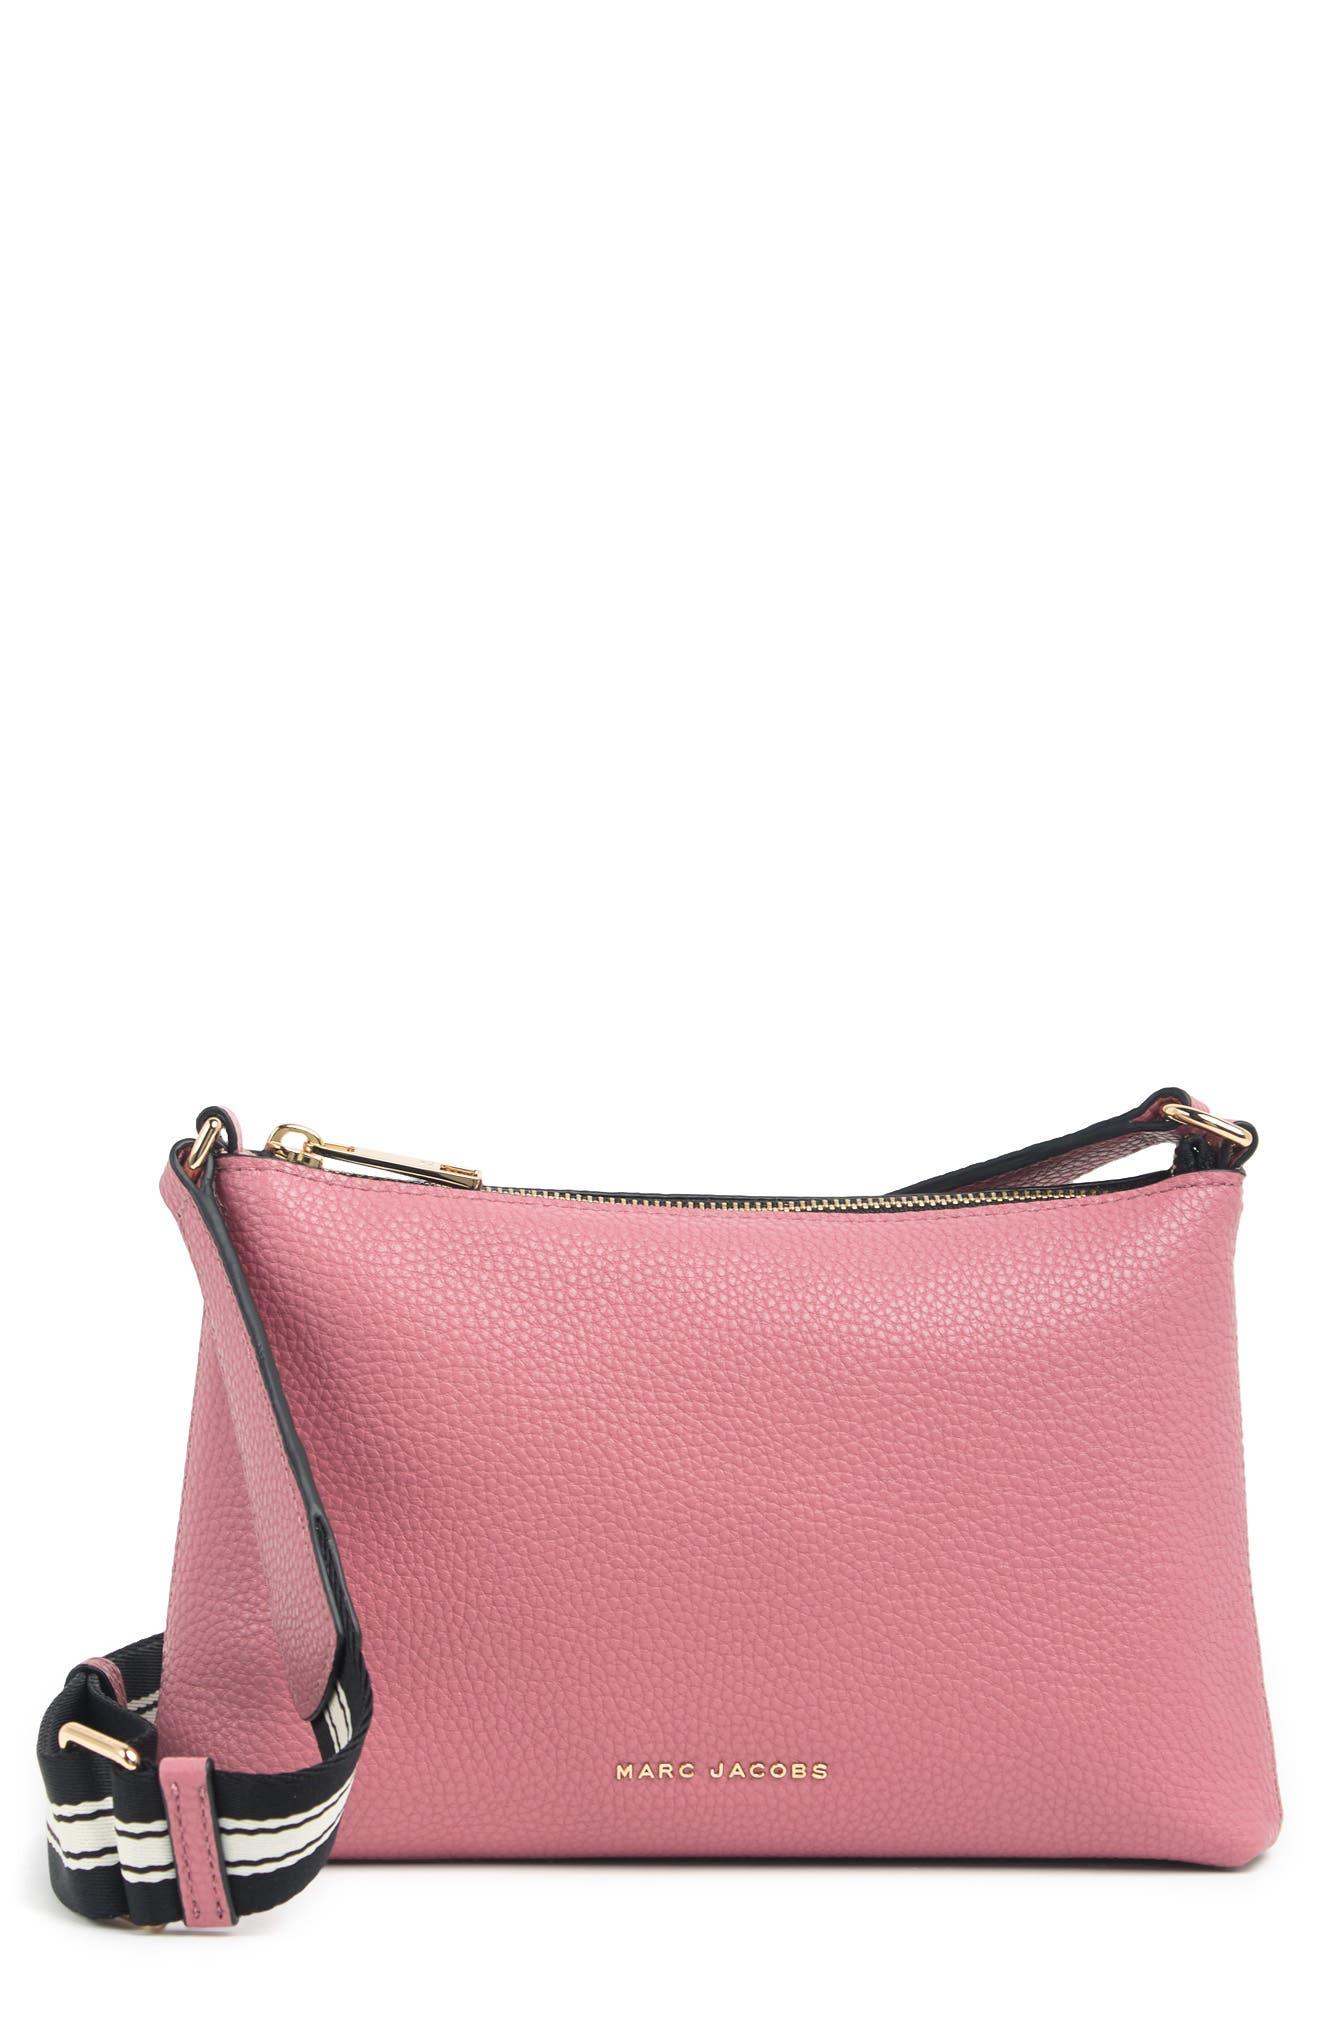 Marc Jacobs The Cosmo Leather Crossbody Bag In Dusty Rose At Nordstrom Rack  in Pink | Lyst